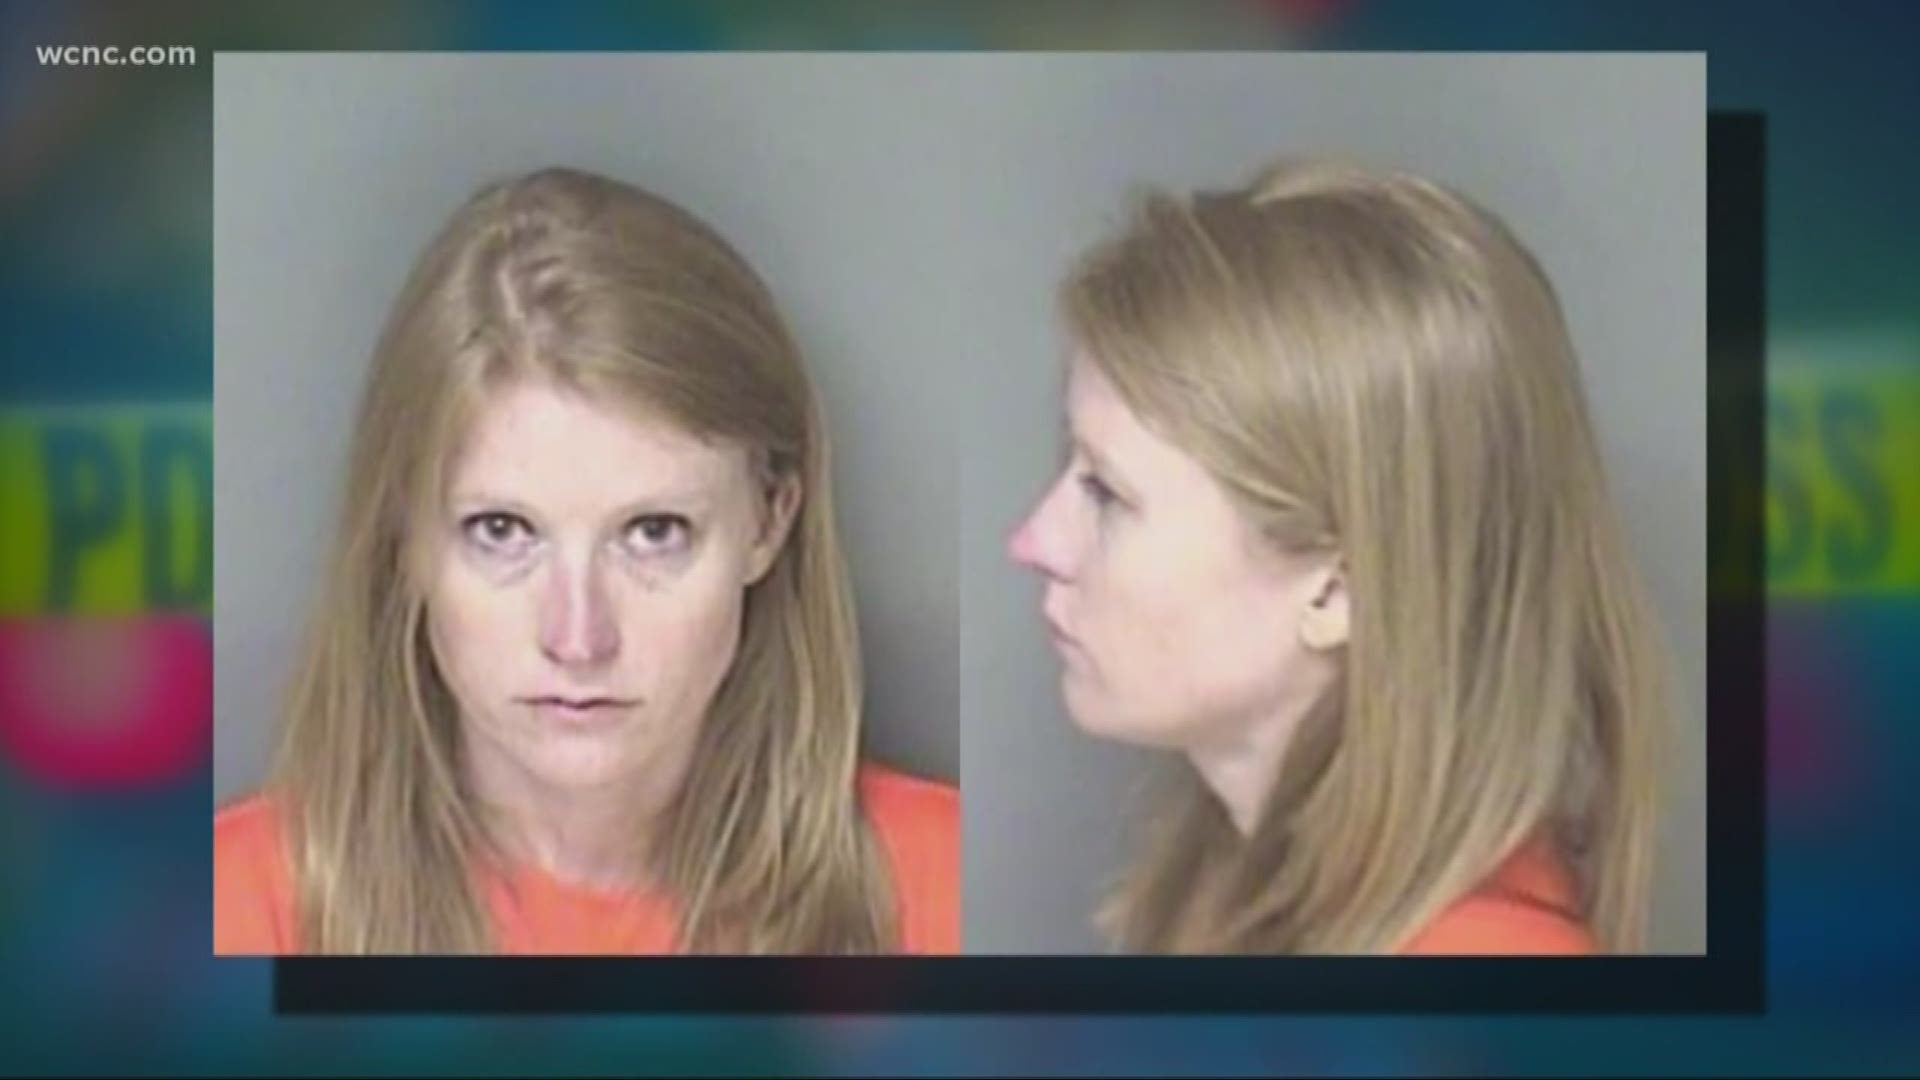 A judge lowered the bond for Lisa Rothwell from $1 million to $100,000.